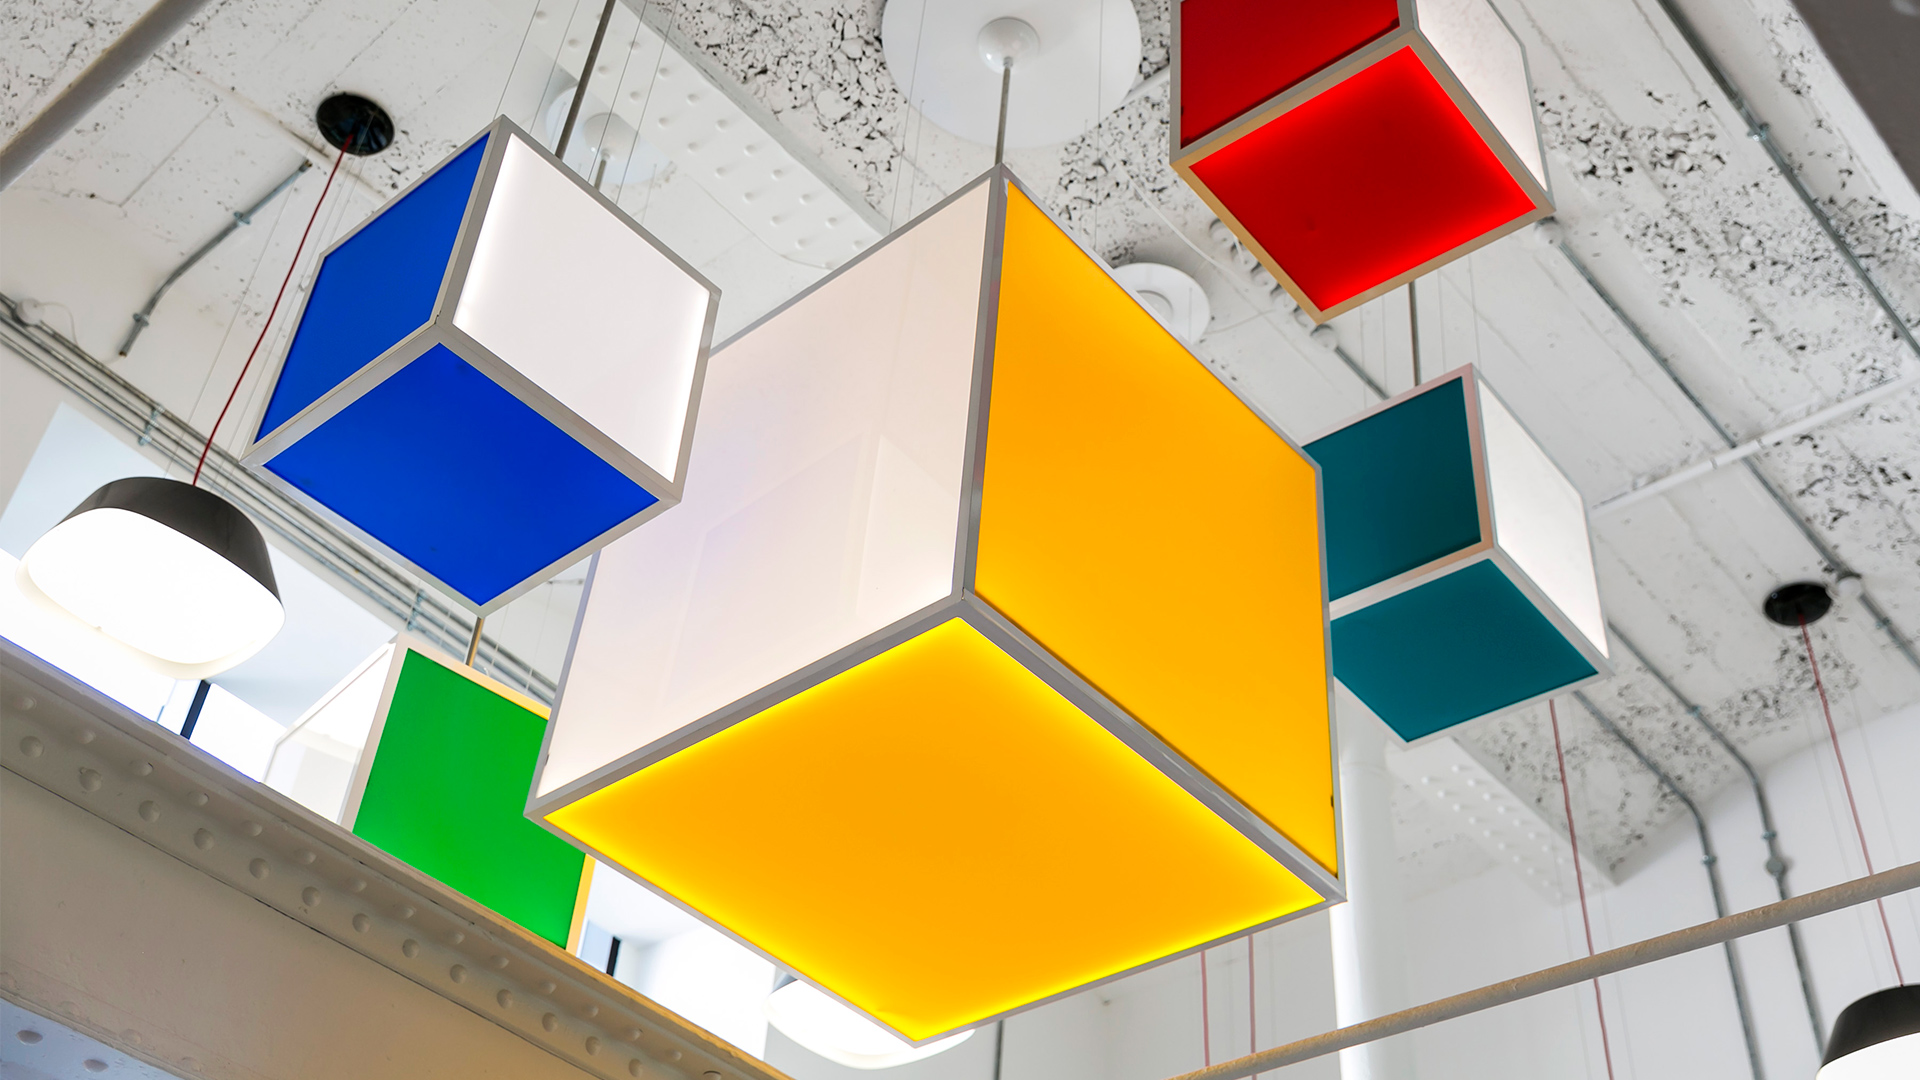 Bright lighting cubes in shades of yellow, red, green and blue hang from the ceiling of the Grainstore lobby